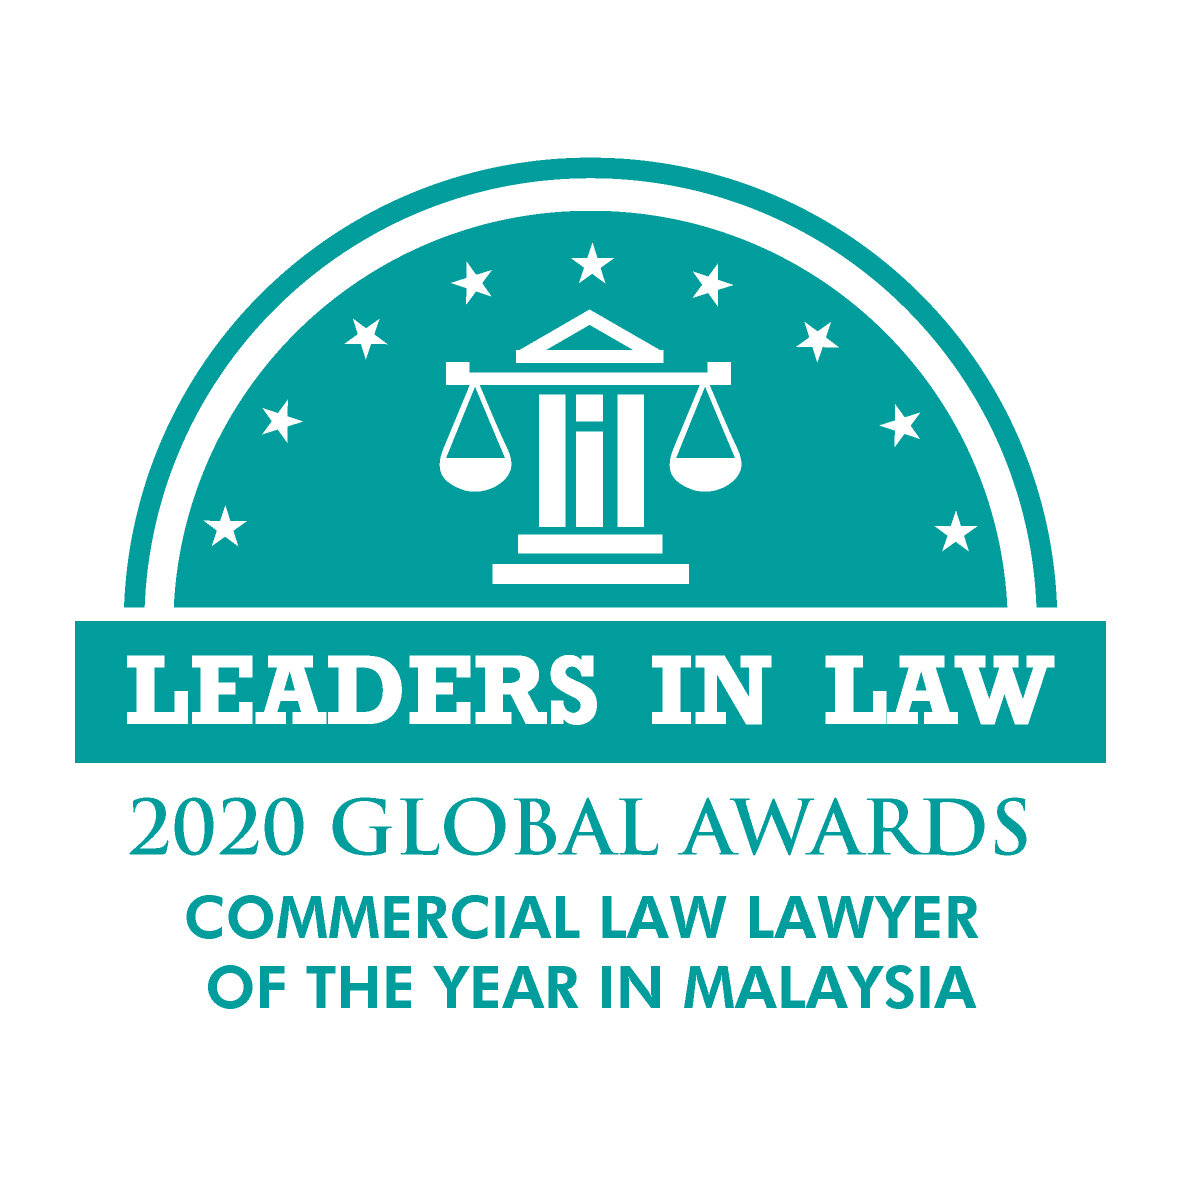 134-TEAL-COMMERCIAL LAW LAWYER OF THE YEAR IN MALAYSIA.JPG